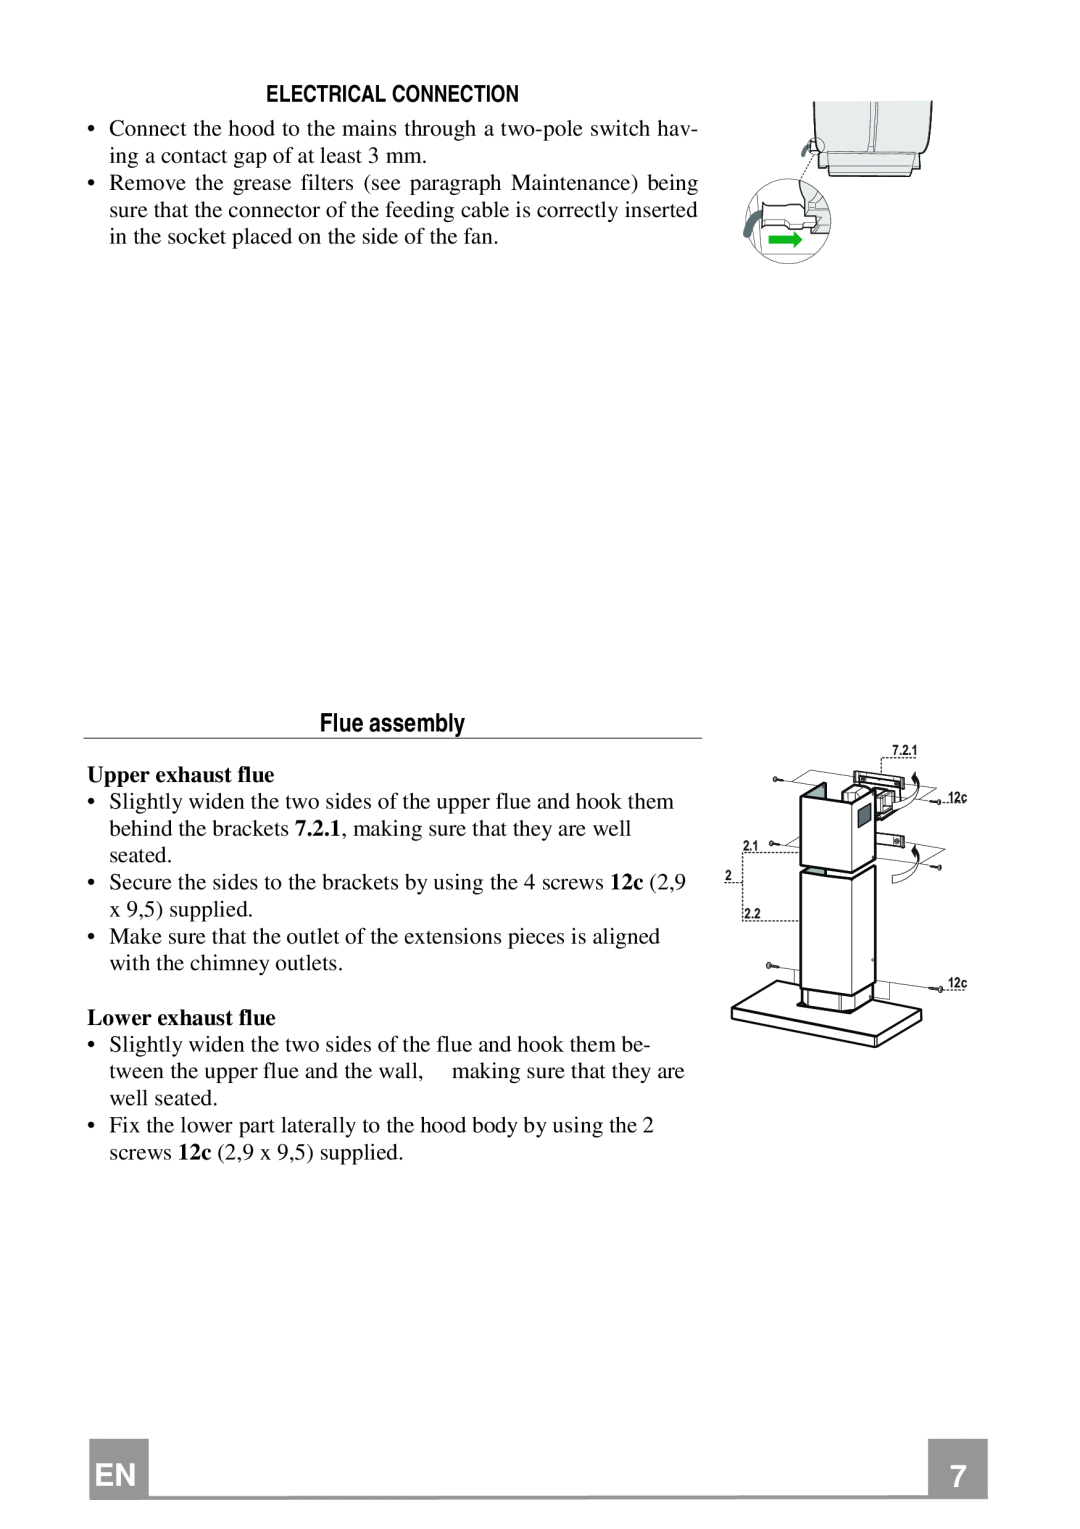 Franke Consumer Products FCR 908 TC manual Flue assembly, Upper exhaust flue, Lower exhaust flue 